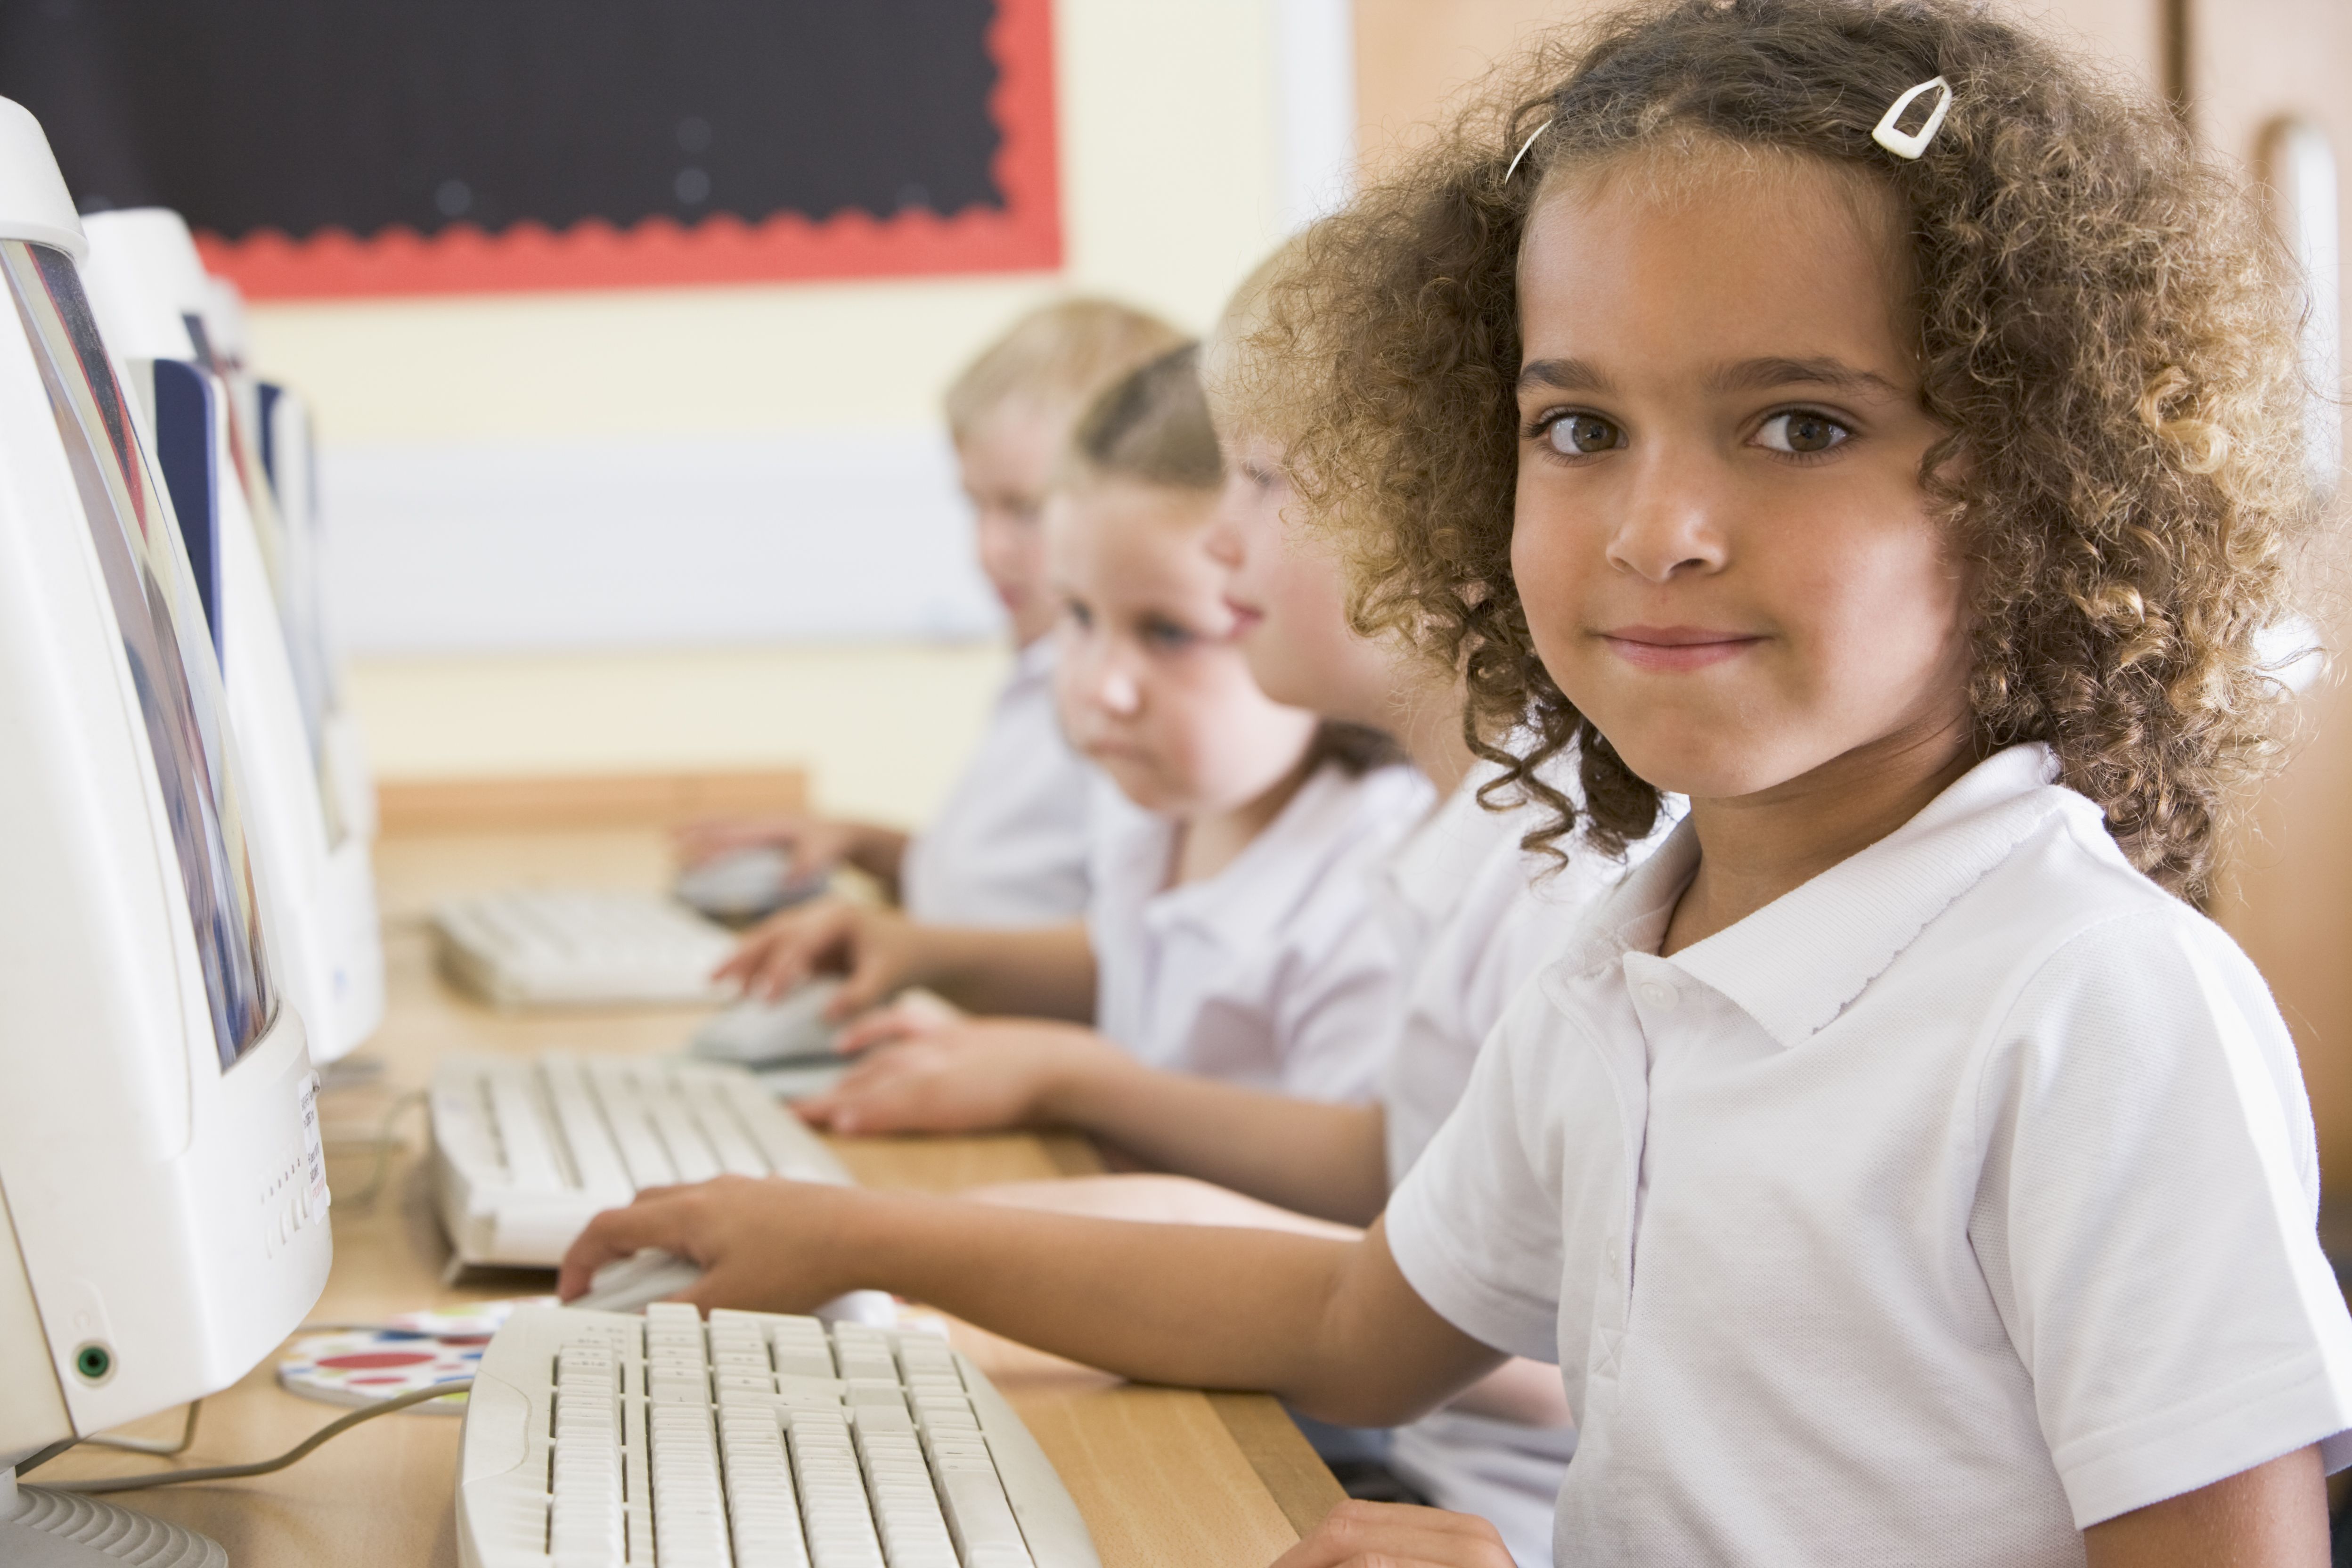 Computer and their importance in school education essay